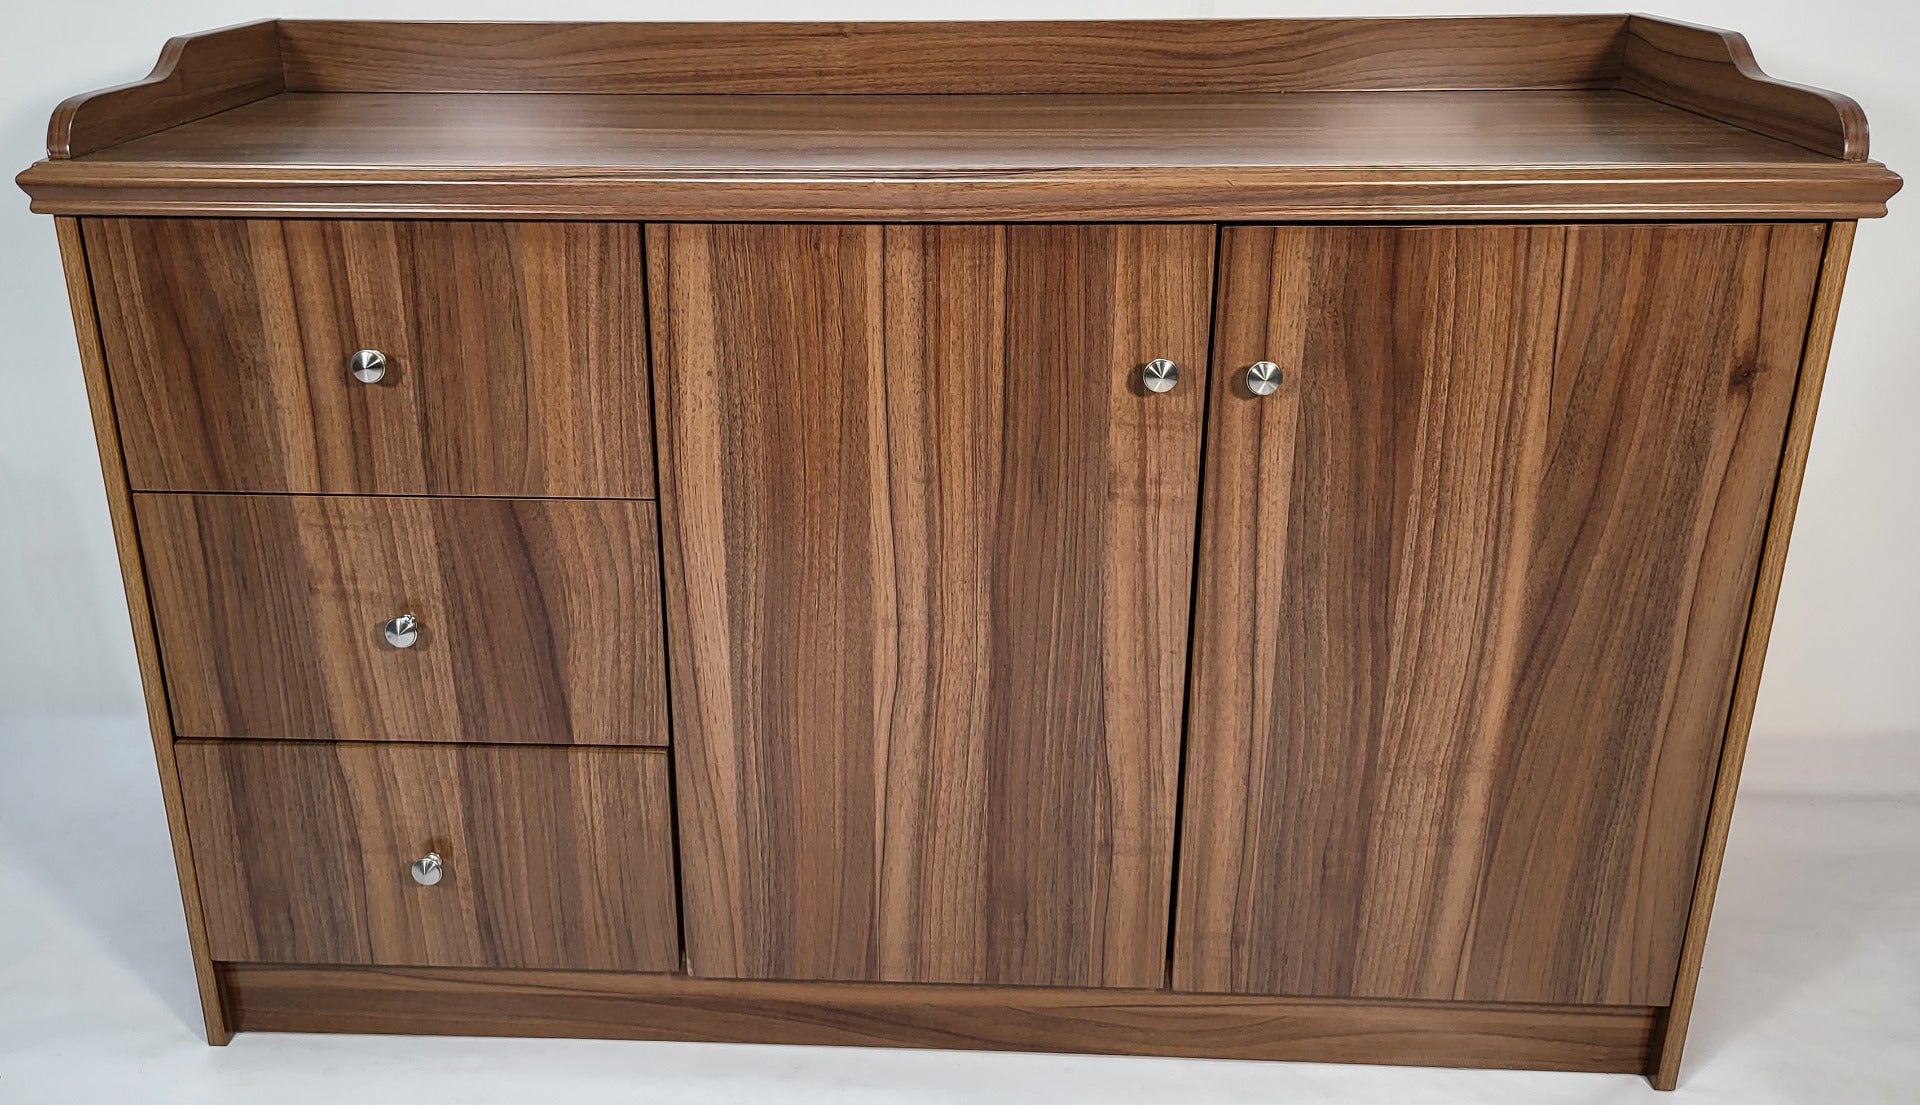 120cm Wide Light Oak Cupboard with Integrated Drawers - 2K01 North Yorkshire